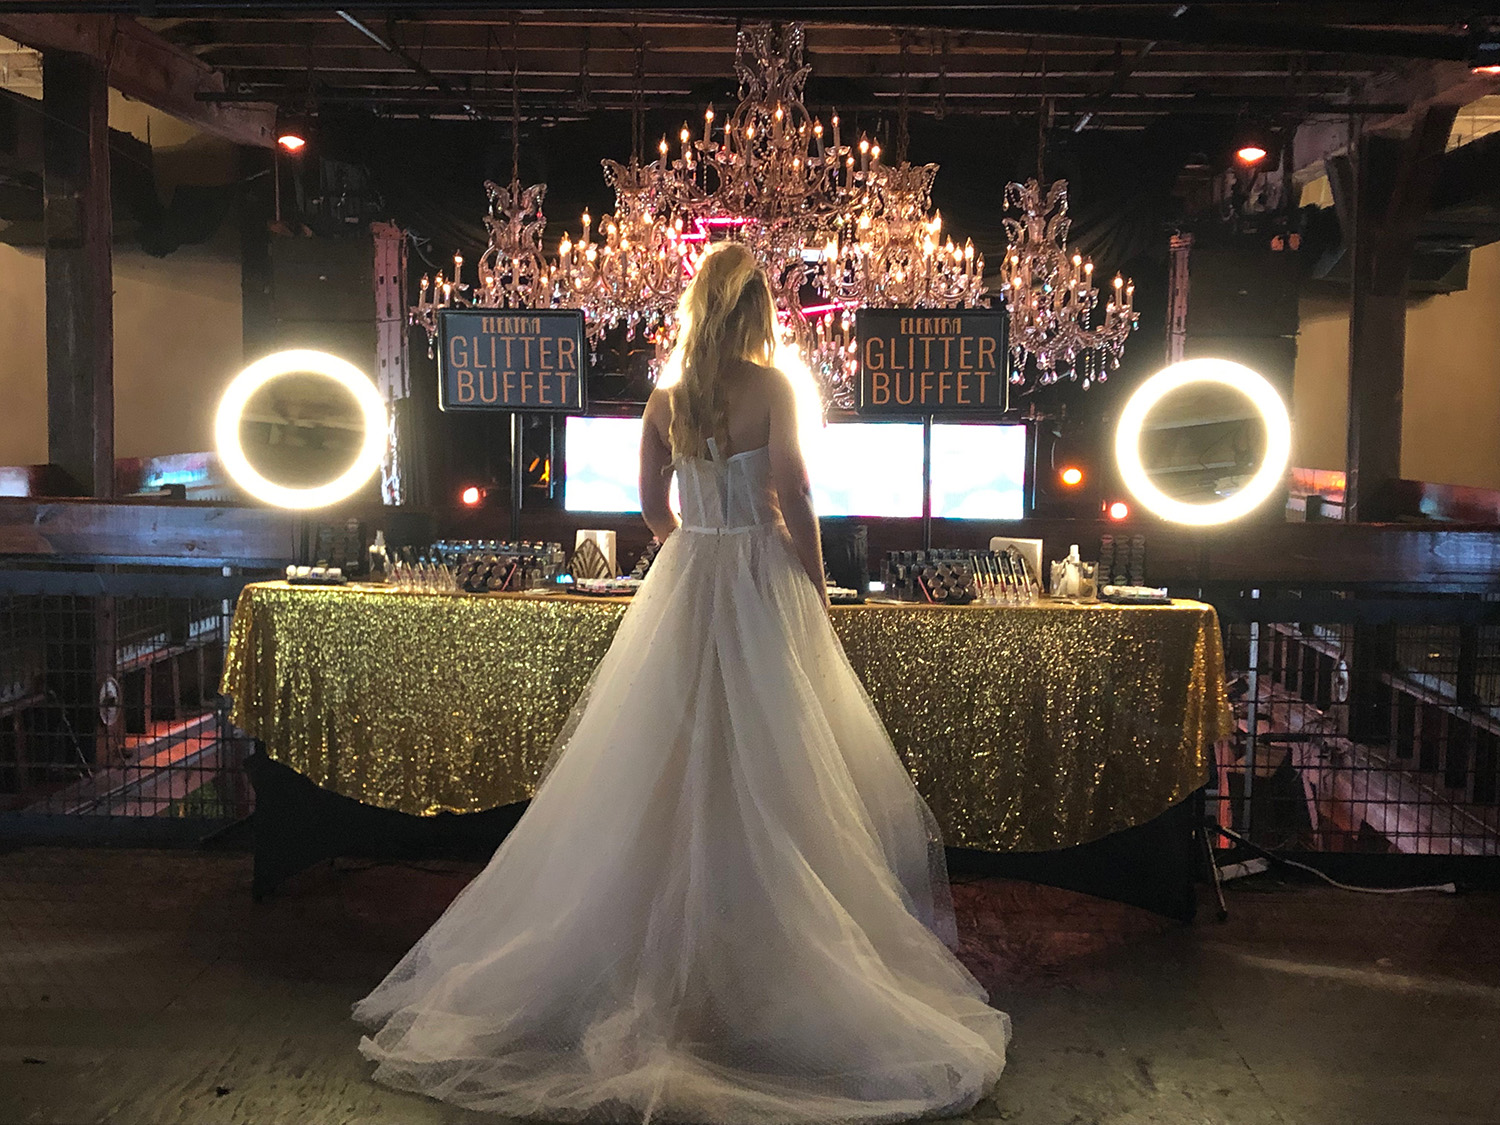 A bride browses the Glitter Buffet Experience by Elektra Cosmetics. Photo: Danielle Smith